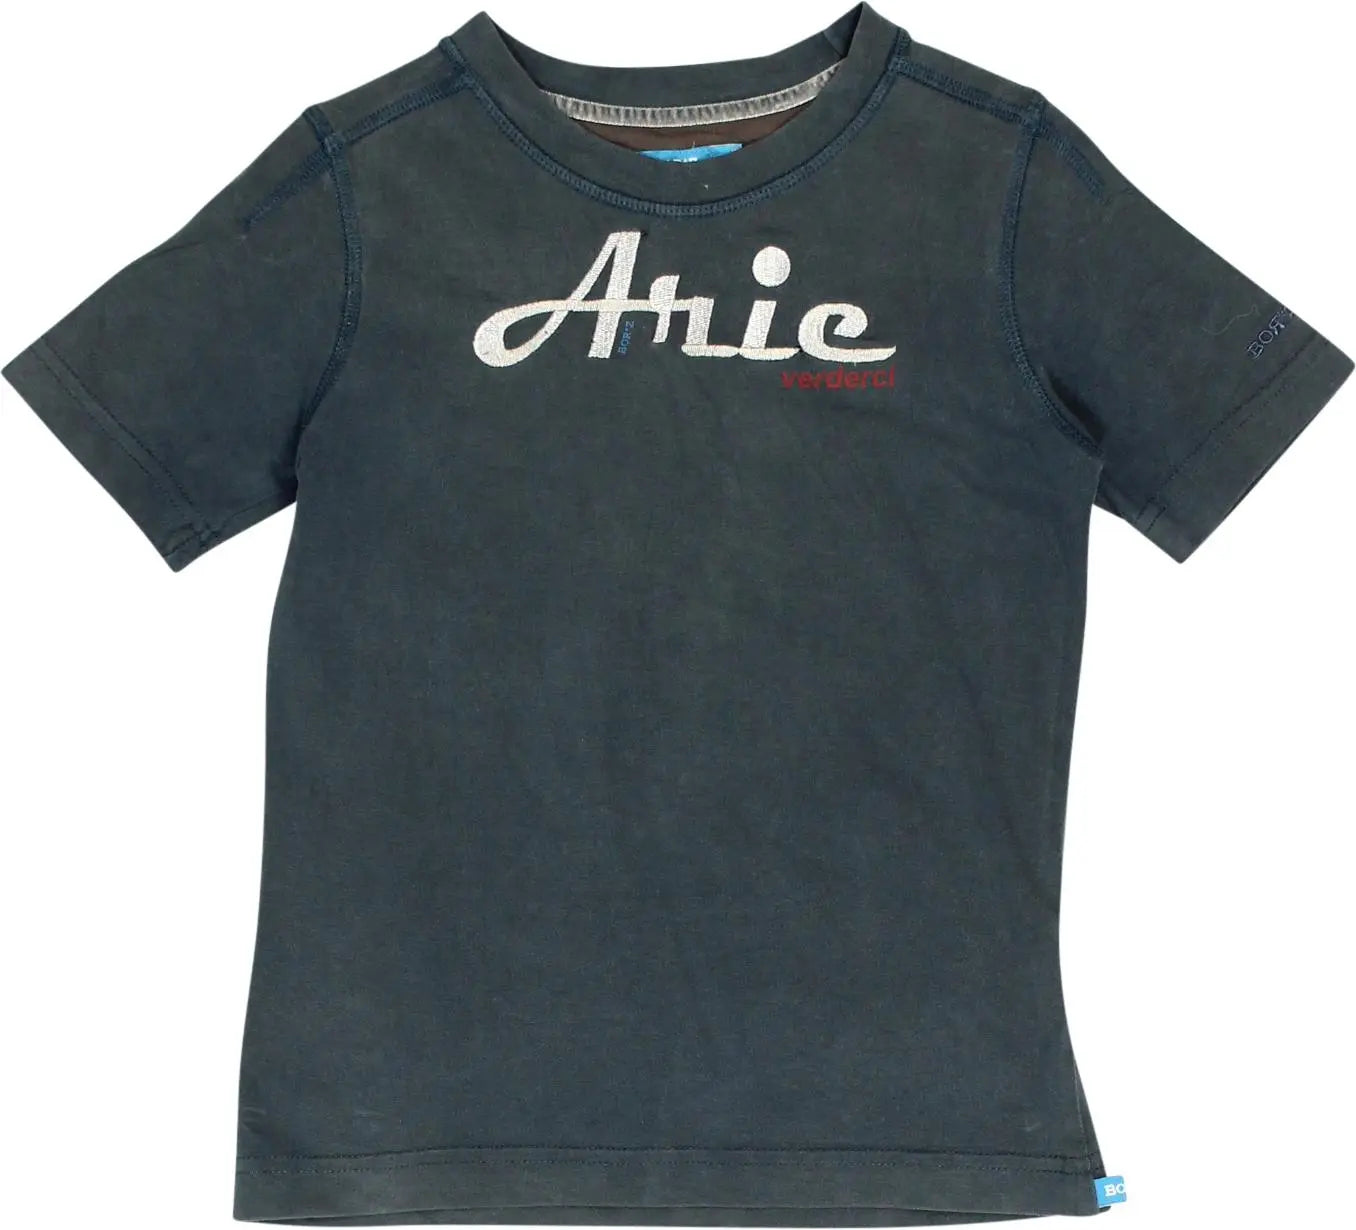 Bor*z - Blue T-shirt- ThriftTale.com - Vintage and second handclothing